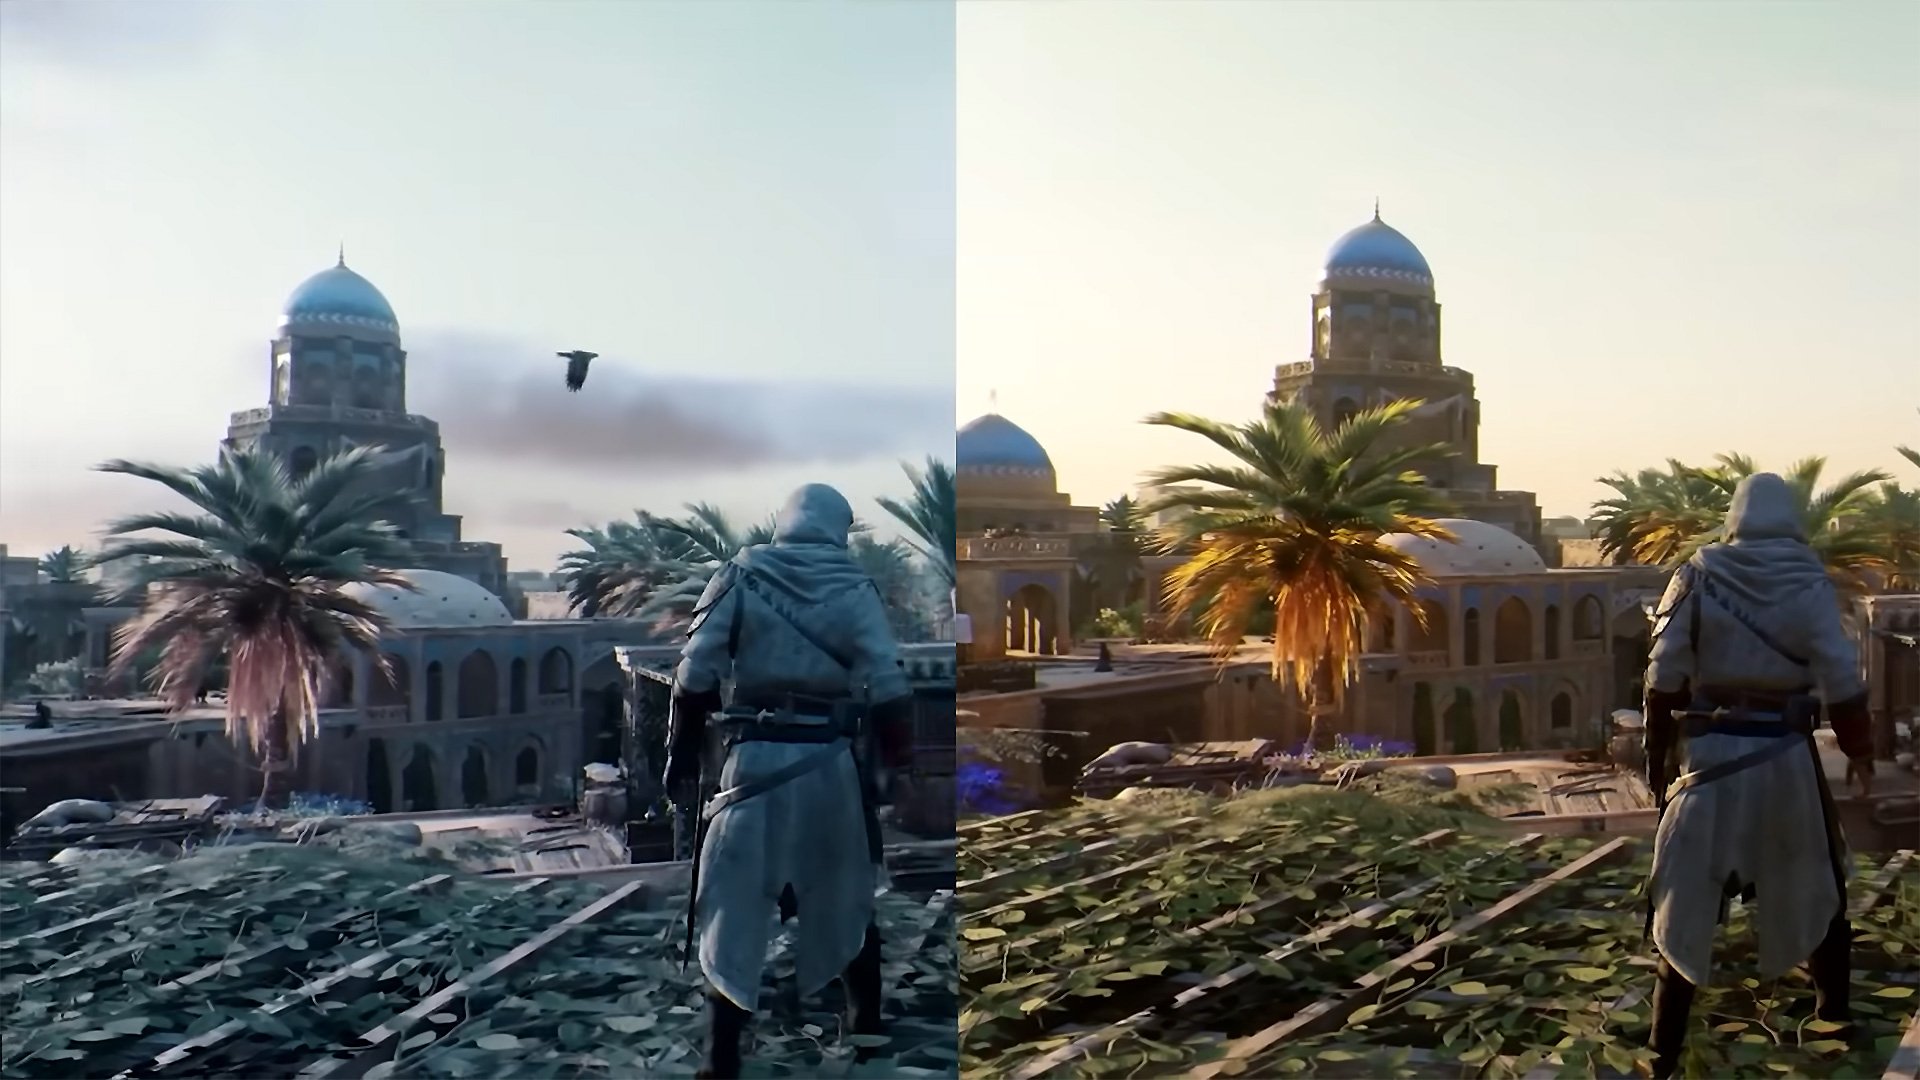 Where does Assassin's Creed Mirage take place?